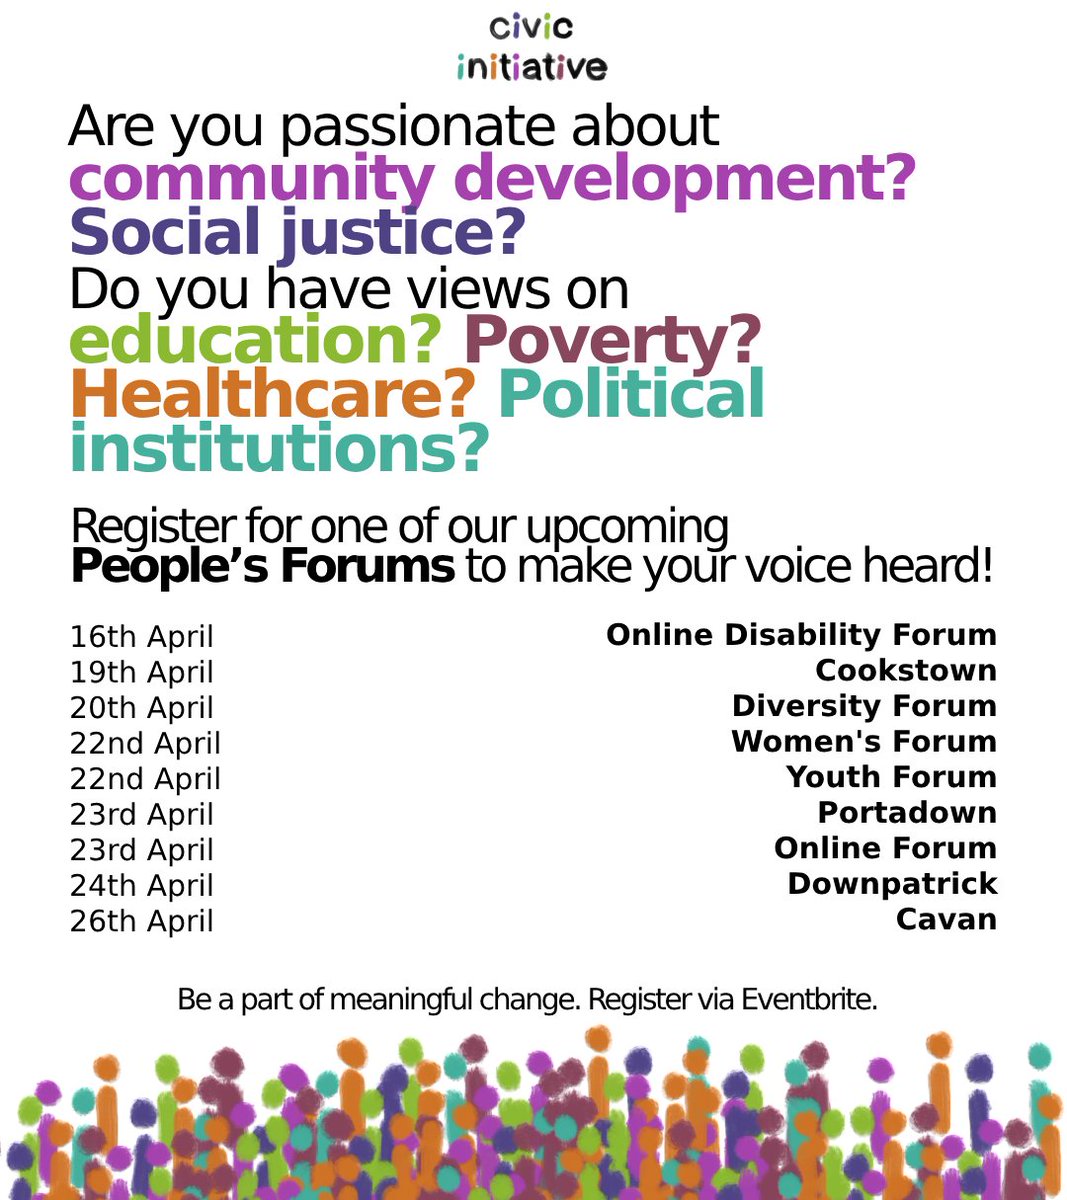 Final dates announced! The @CivicInitNI wants to hear your voice. Recommendations developed through this project will be delivered to the Irish & UK governments, as well as the NI Assembly. Be a part of meaningful change and register your place here: tinyurl.com/yu48kpkr